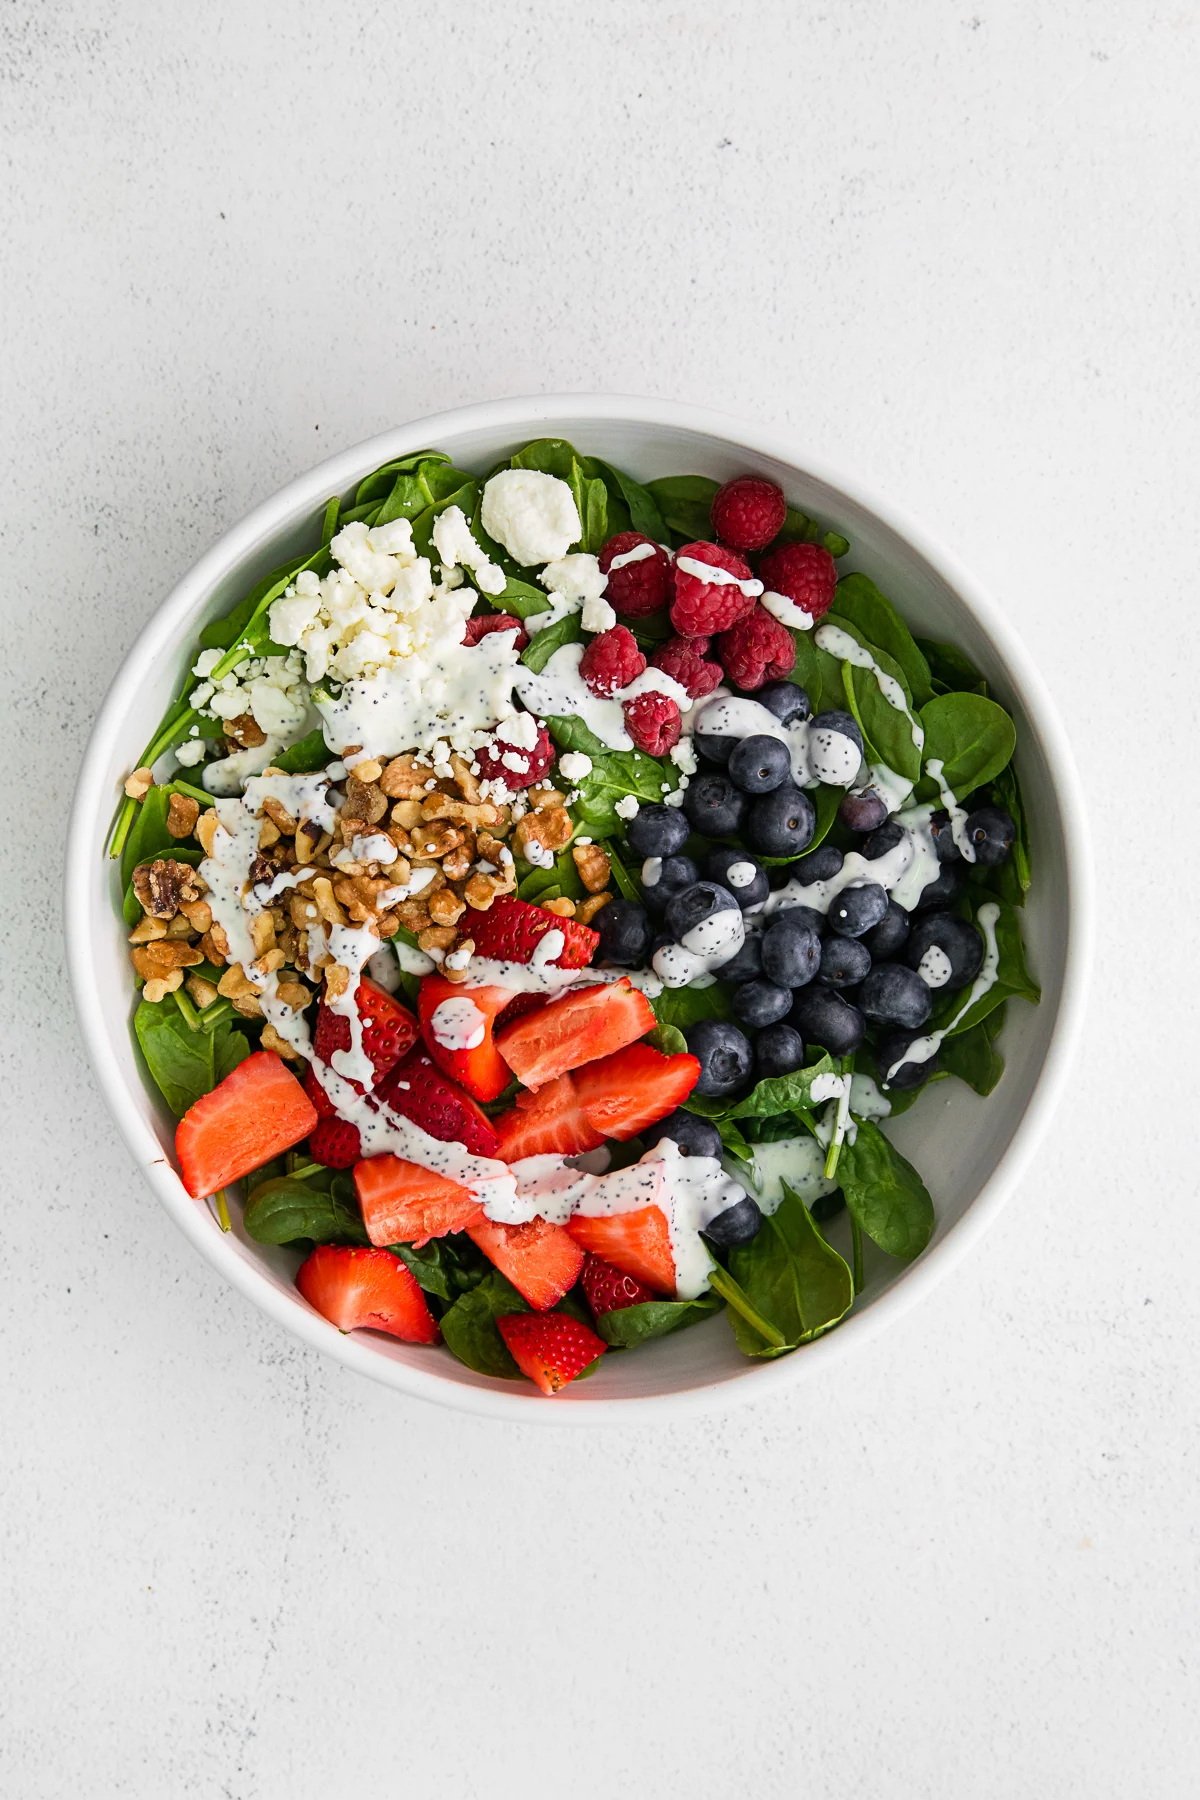 Spinach Berry Salad drizzled with homemade poppy seed dressing.